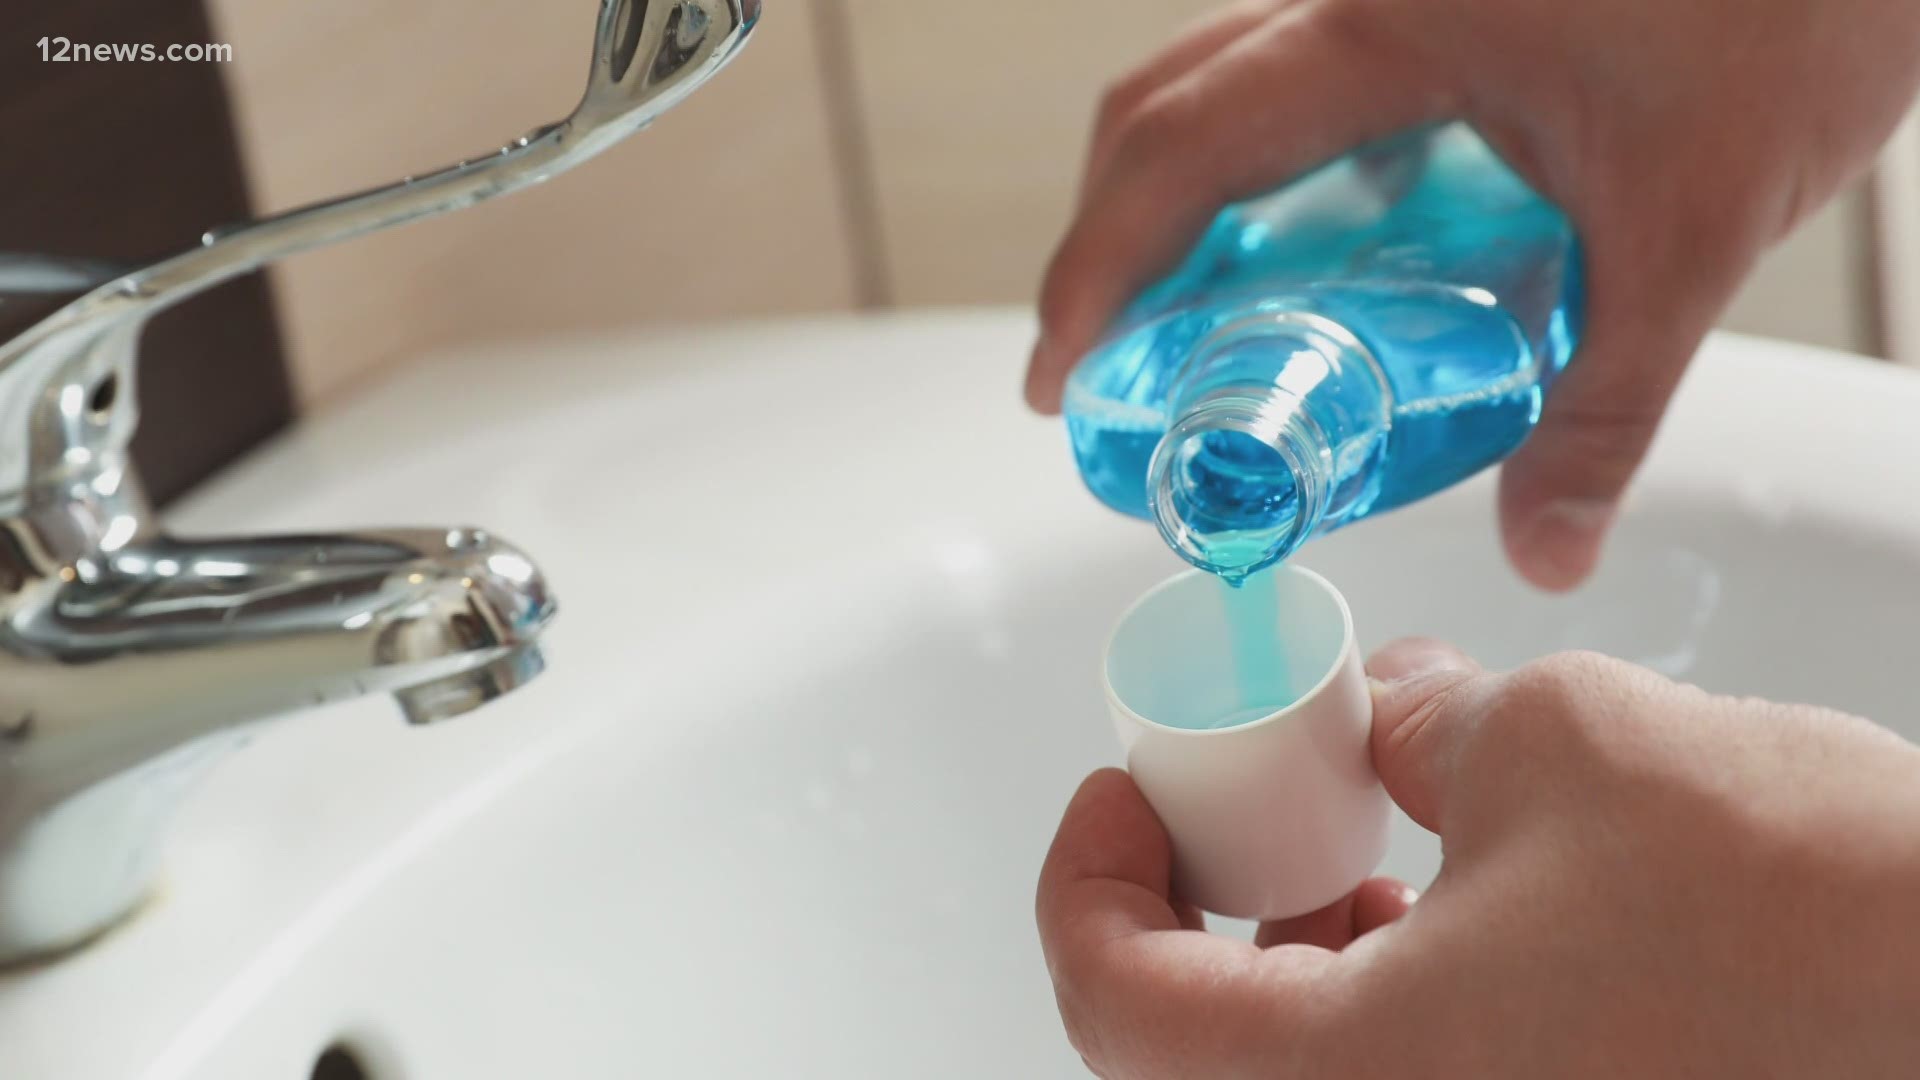 A new study shows mouthwash may help slow the spread of coronavirus. It’s not a cure, but it could help keep you and your family safe.